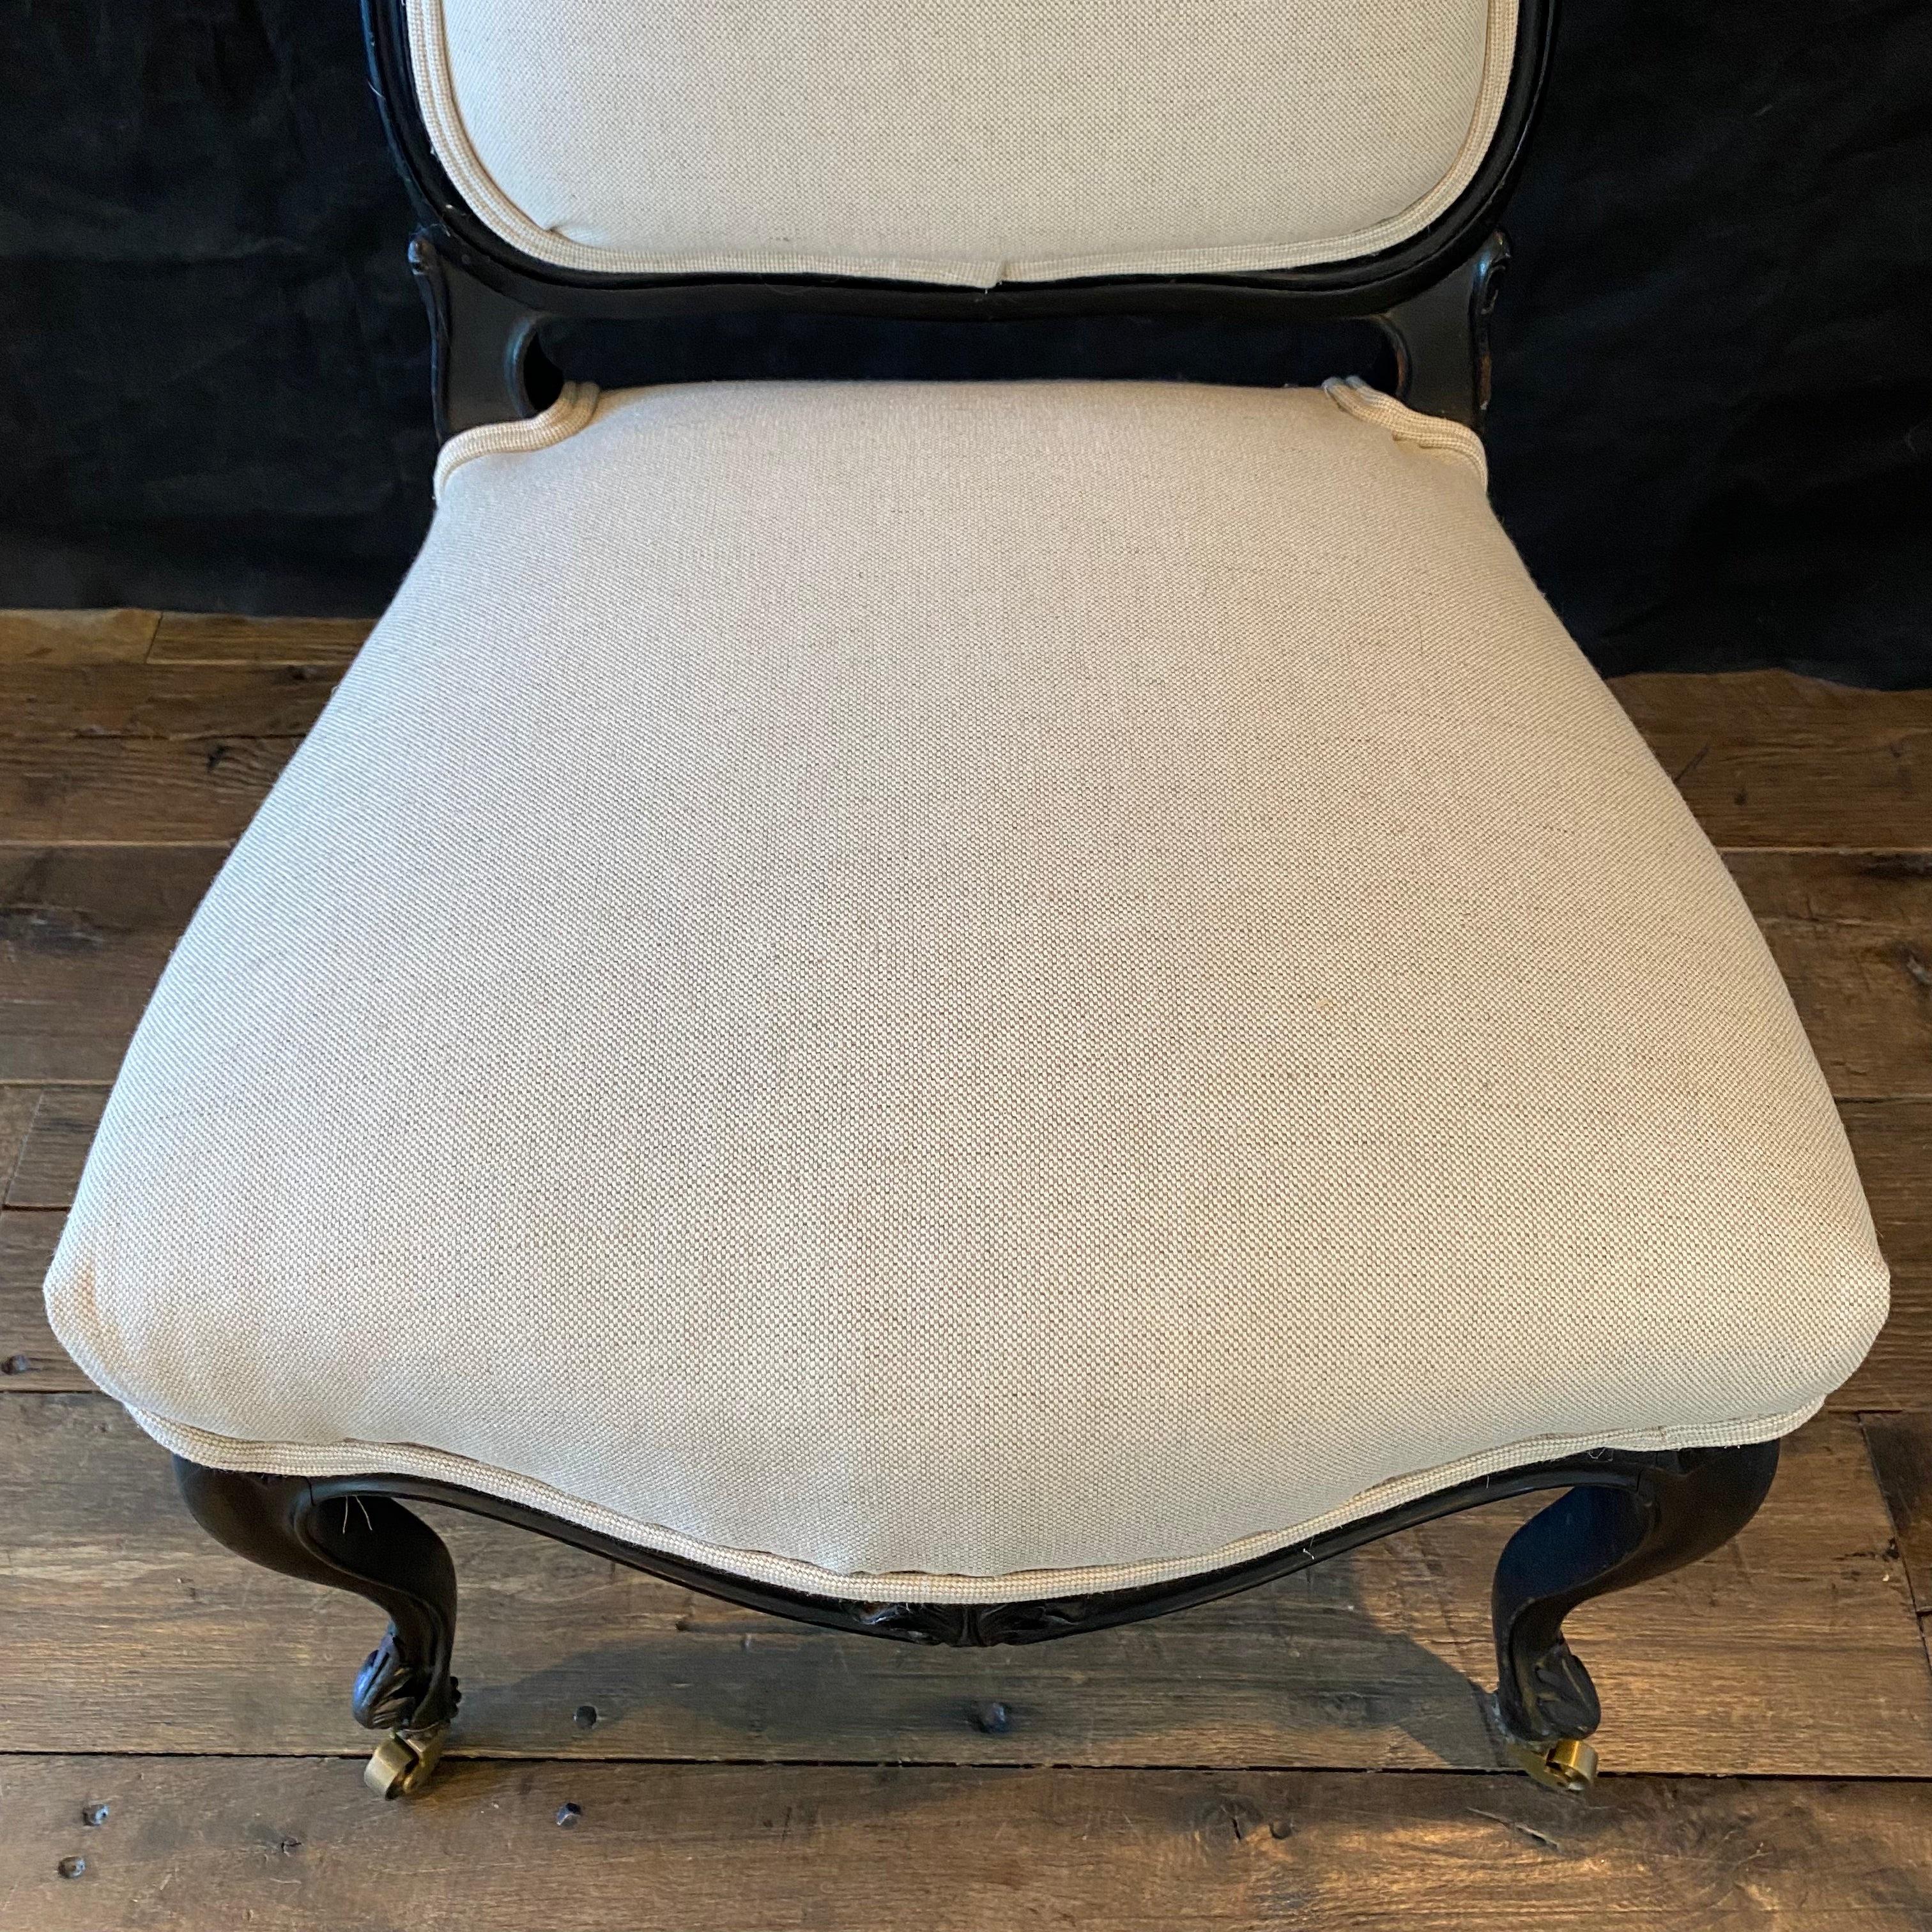 Lovely French Louis XV ebony chair newly reupholstered in a neutral high end British linen cotton blend. There are brass rolling casters on the front, intricate floral carving on the apron and back, and solid wood construction, all supported by